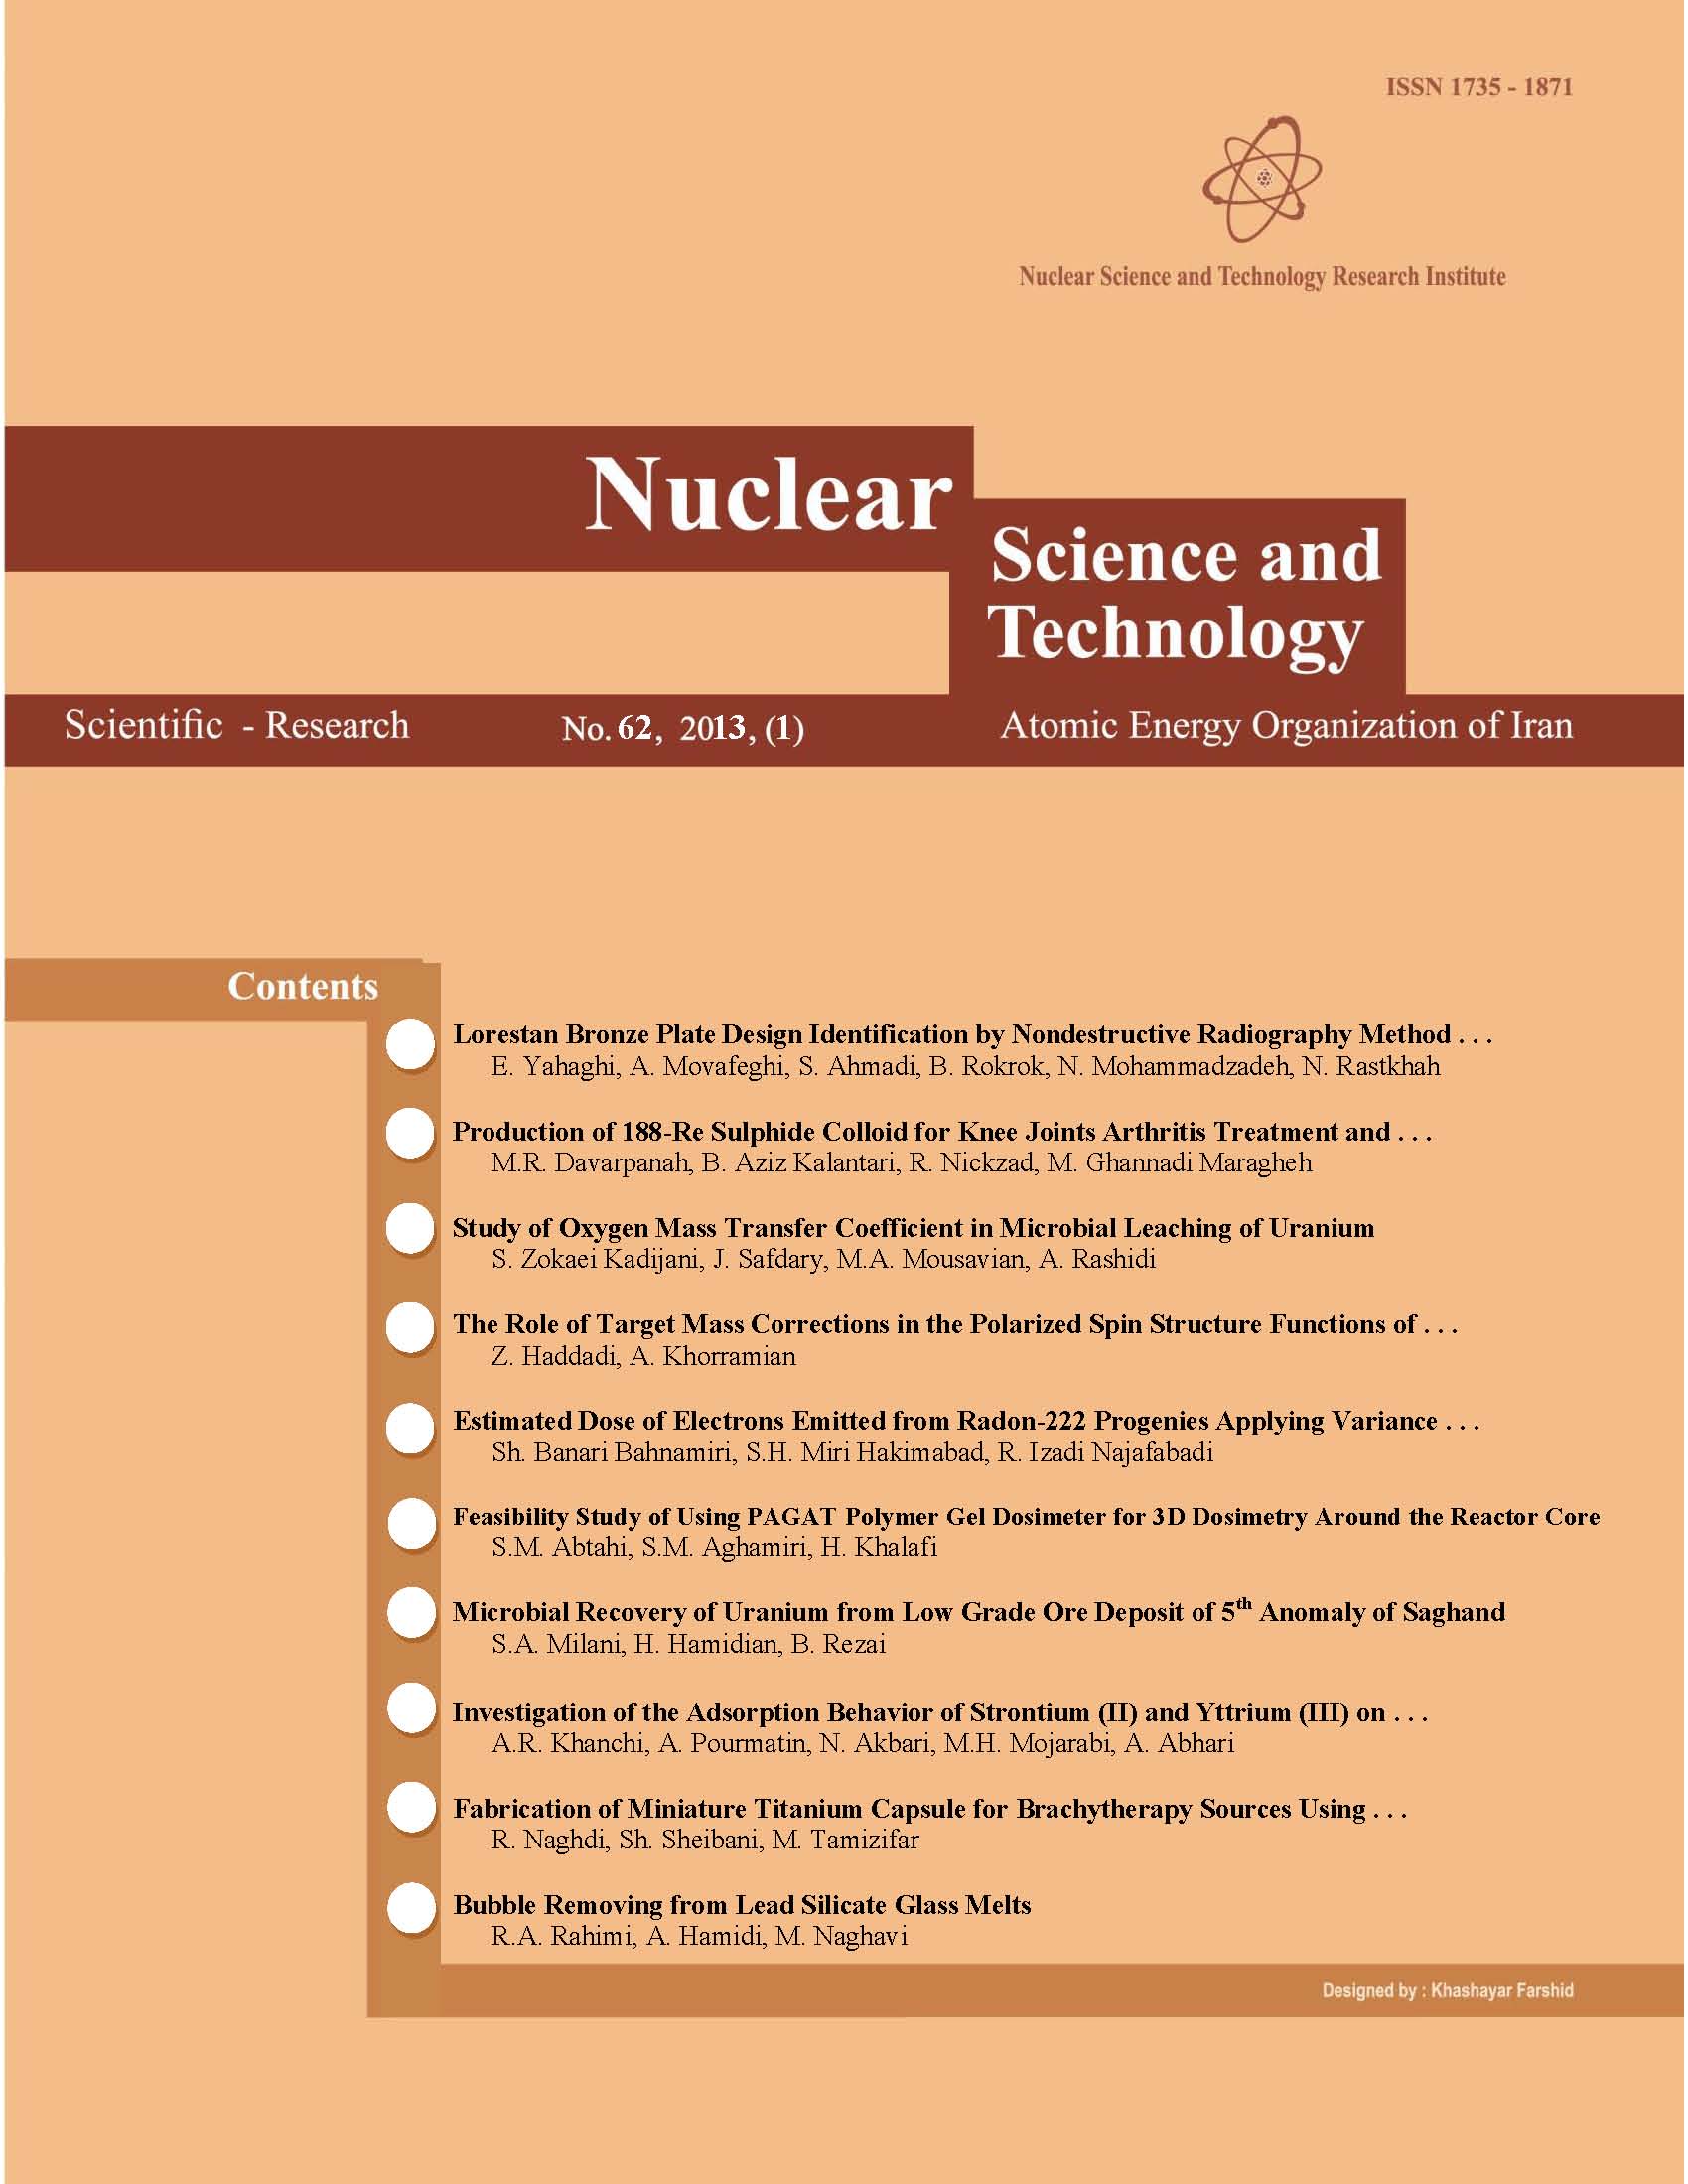 Journal of Nuclear Science and Technology (JONSAT)